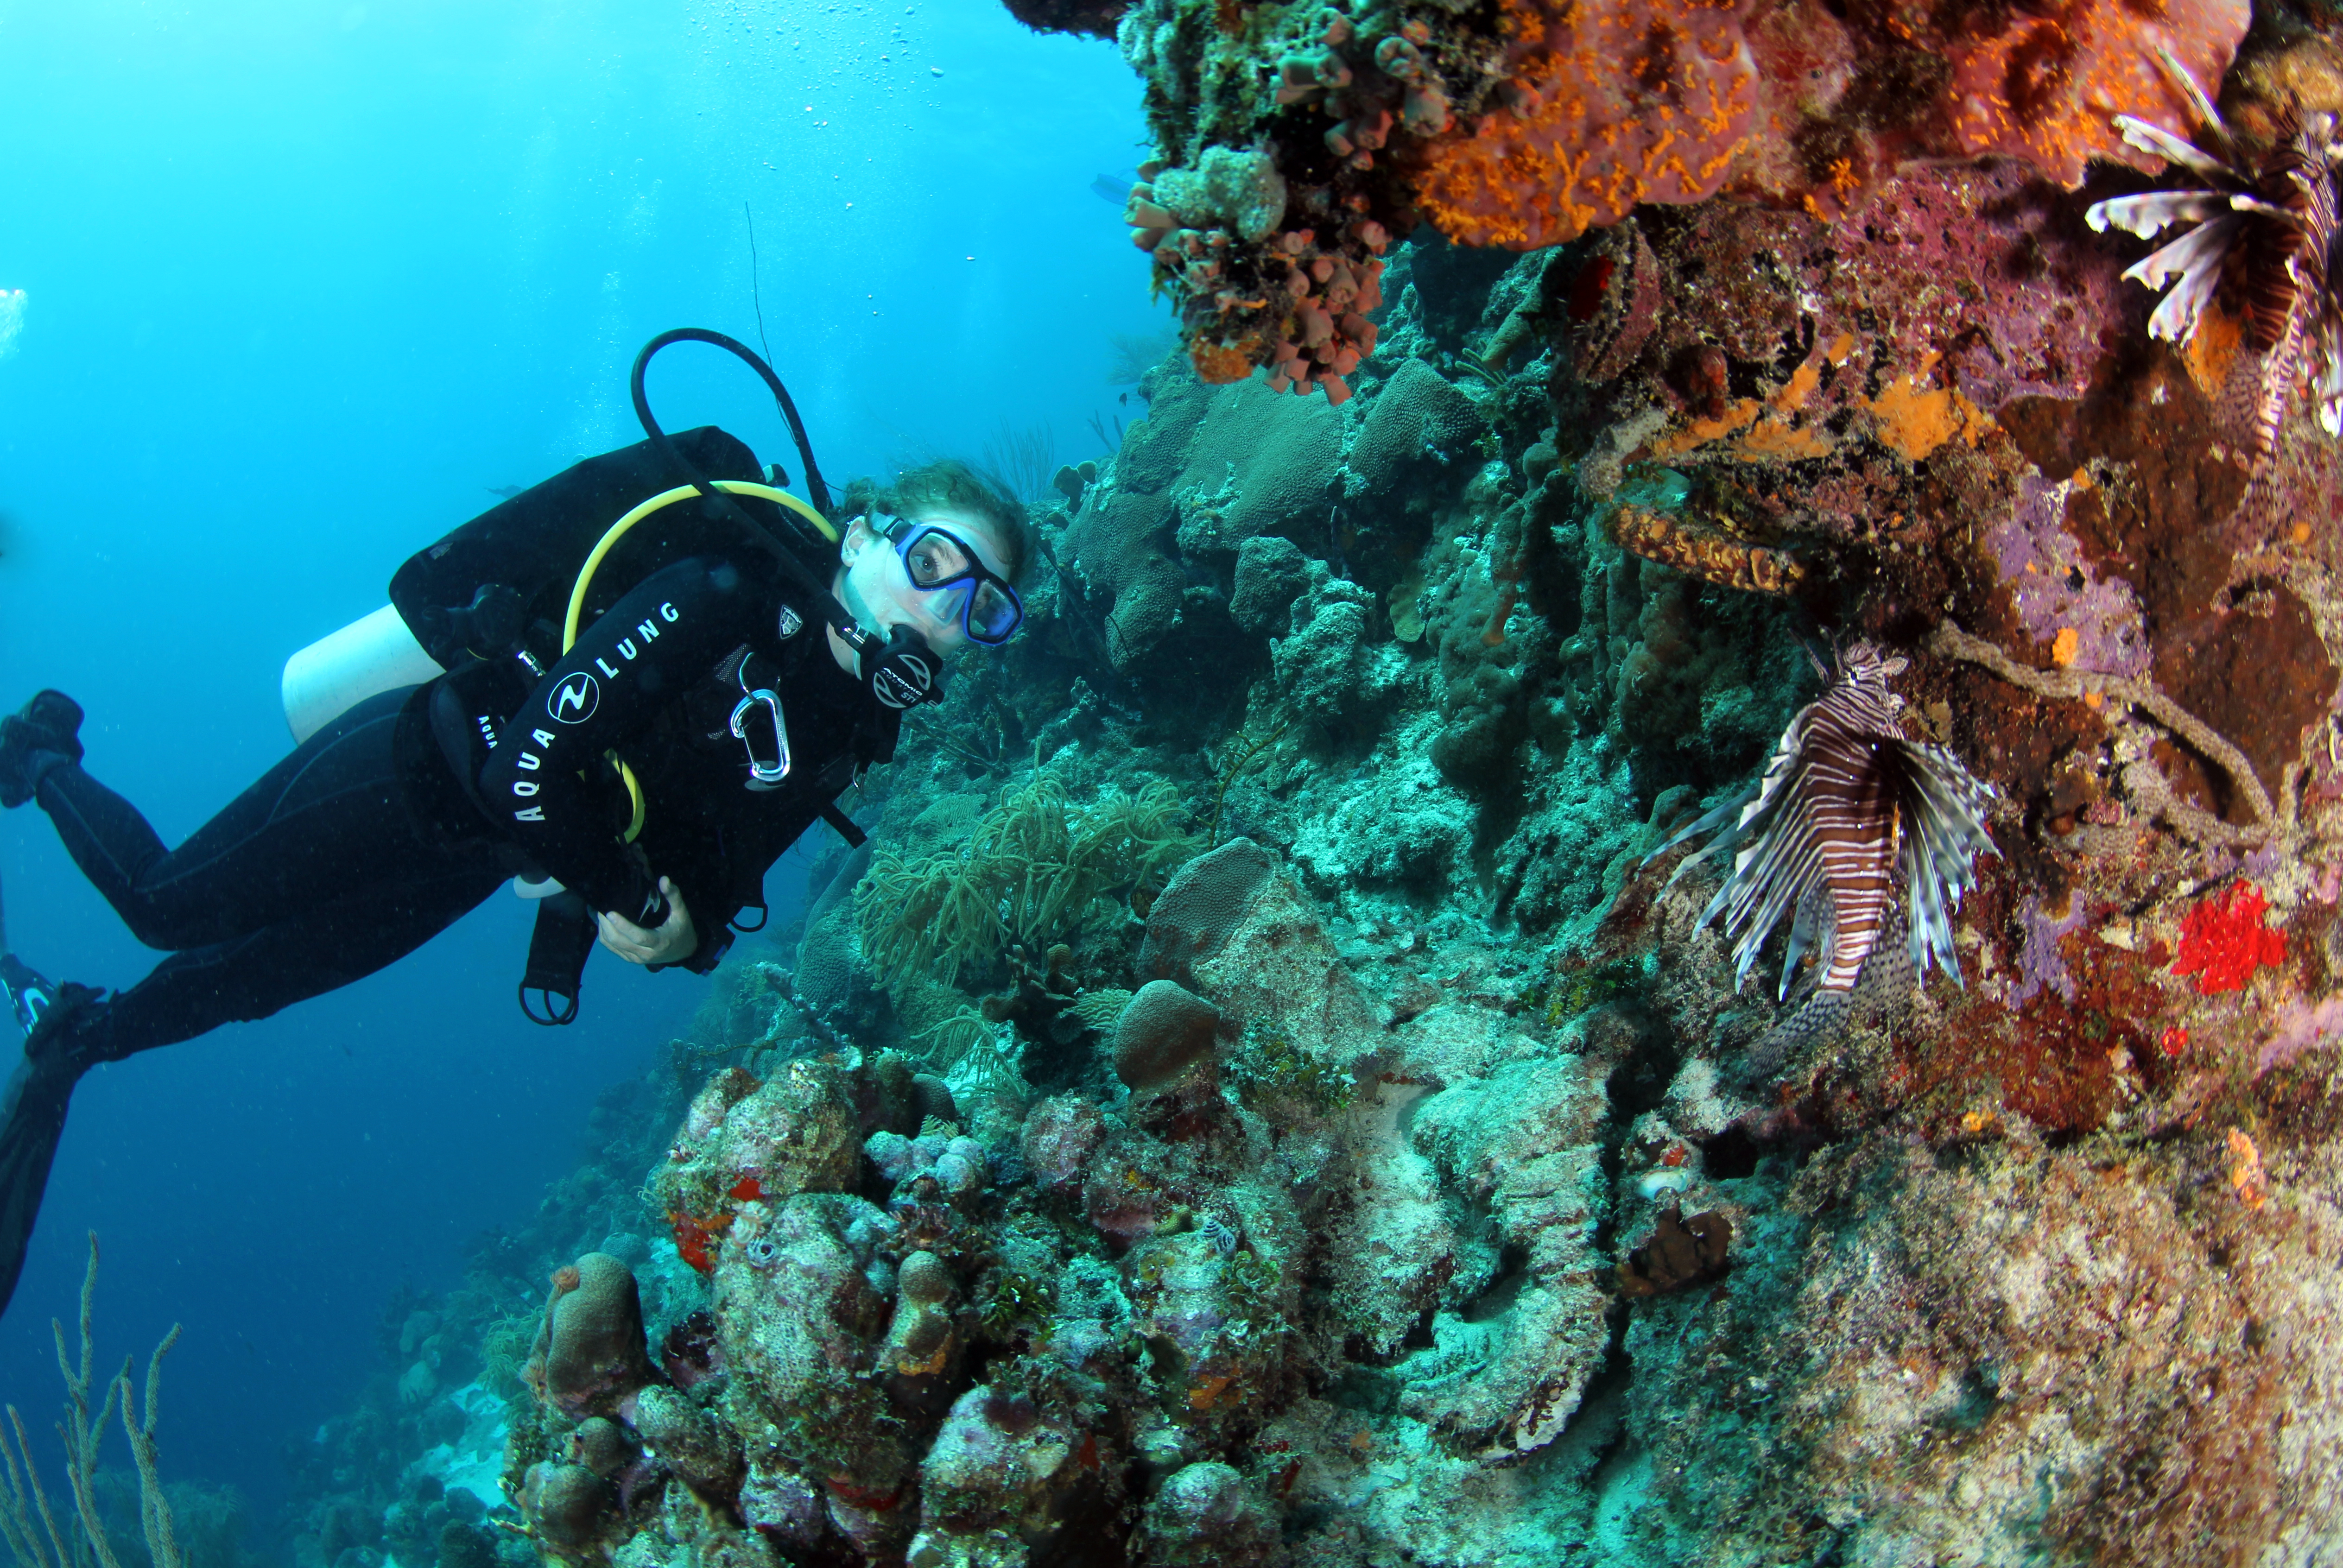 Amelia SCUBA diving looking at invasive lionfish on a Caribbean reef